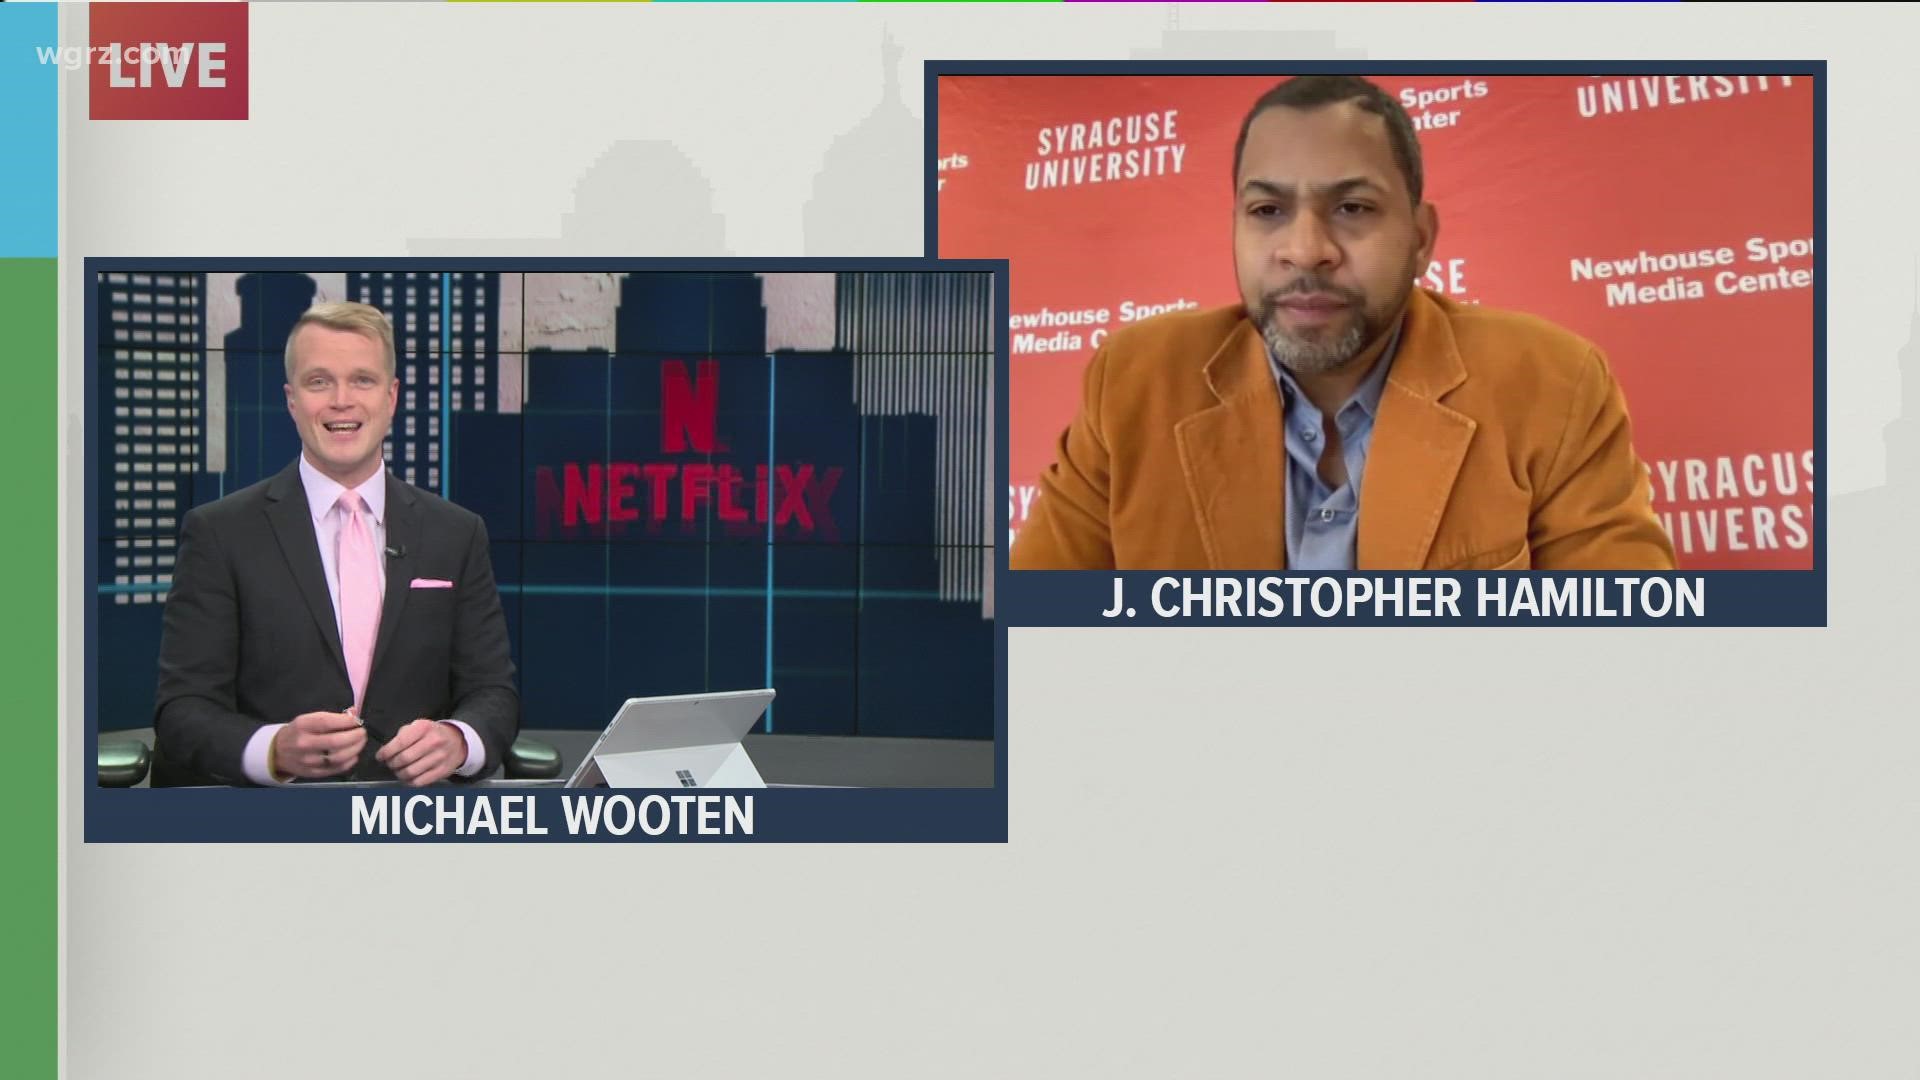 J. Christopher Hamilton, an attorney and assistant professor at Syracuse University's Newhouse School of Public Communications, discussed the latest Netflix news.